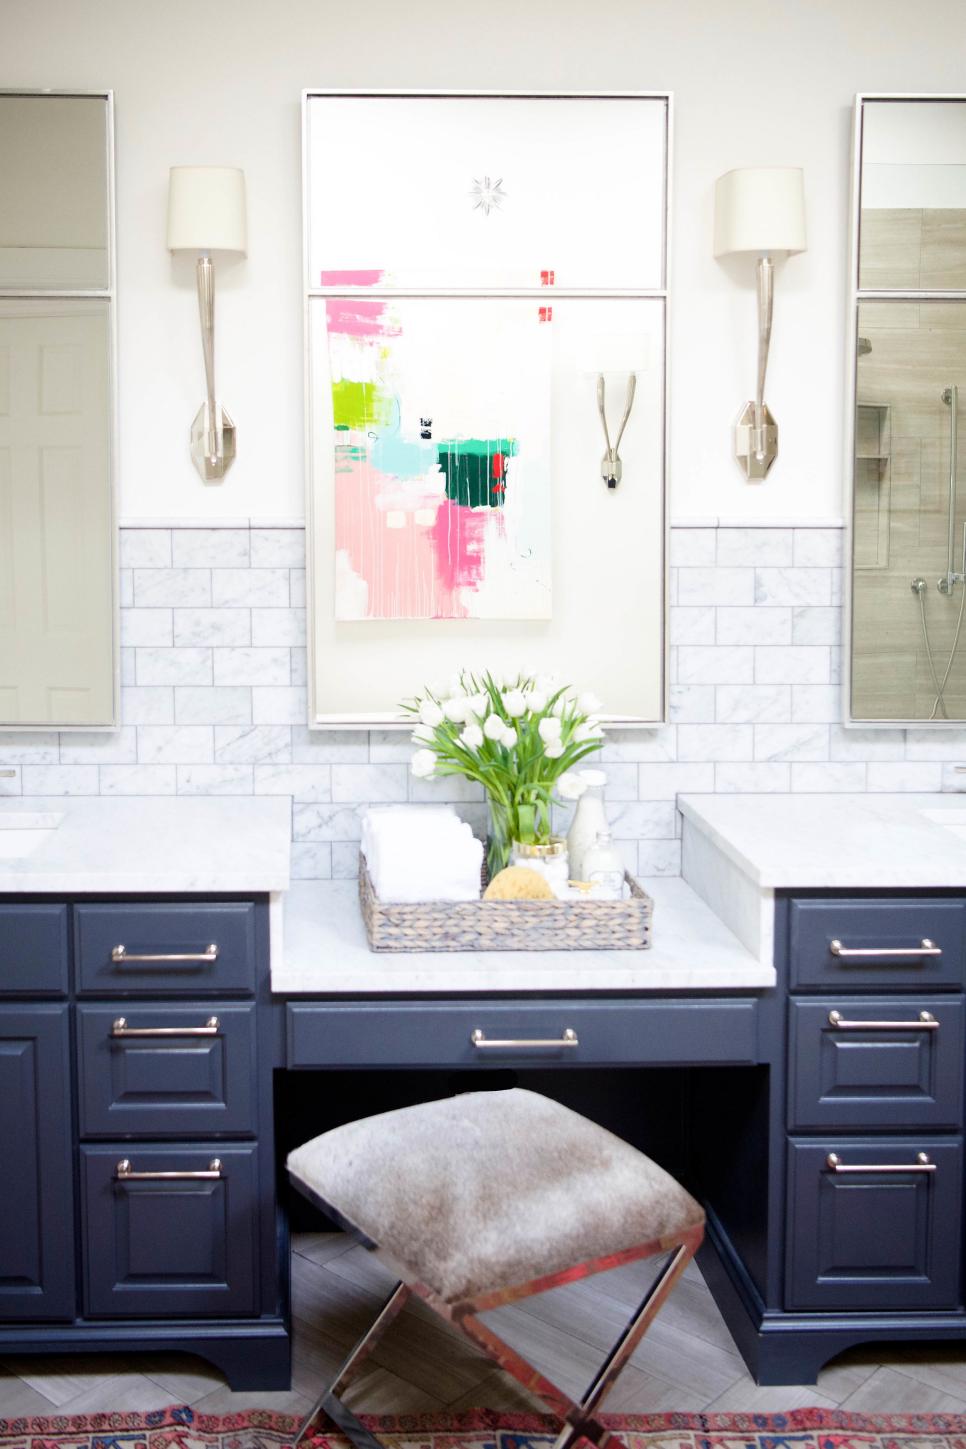 Vanity Stool And Marble Wall Tile, Contemporary Vanity Stools For Bathroom